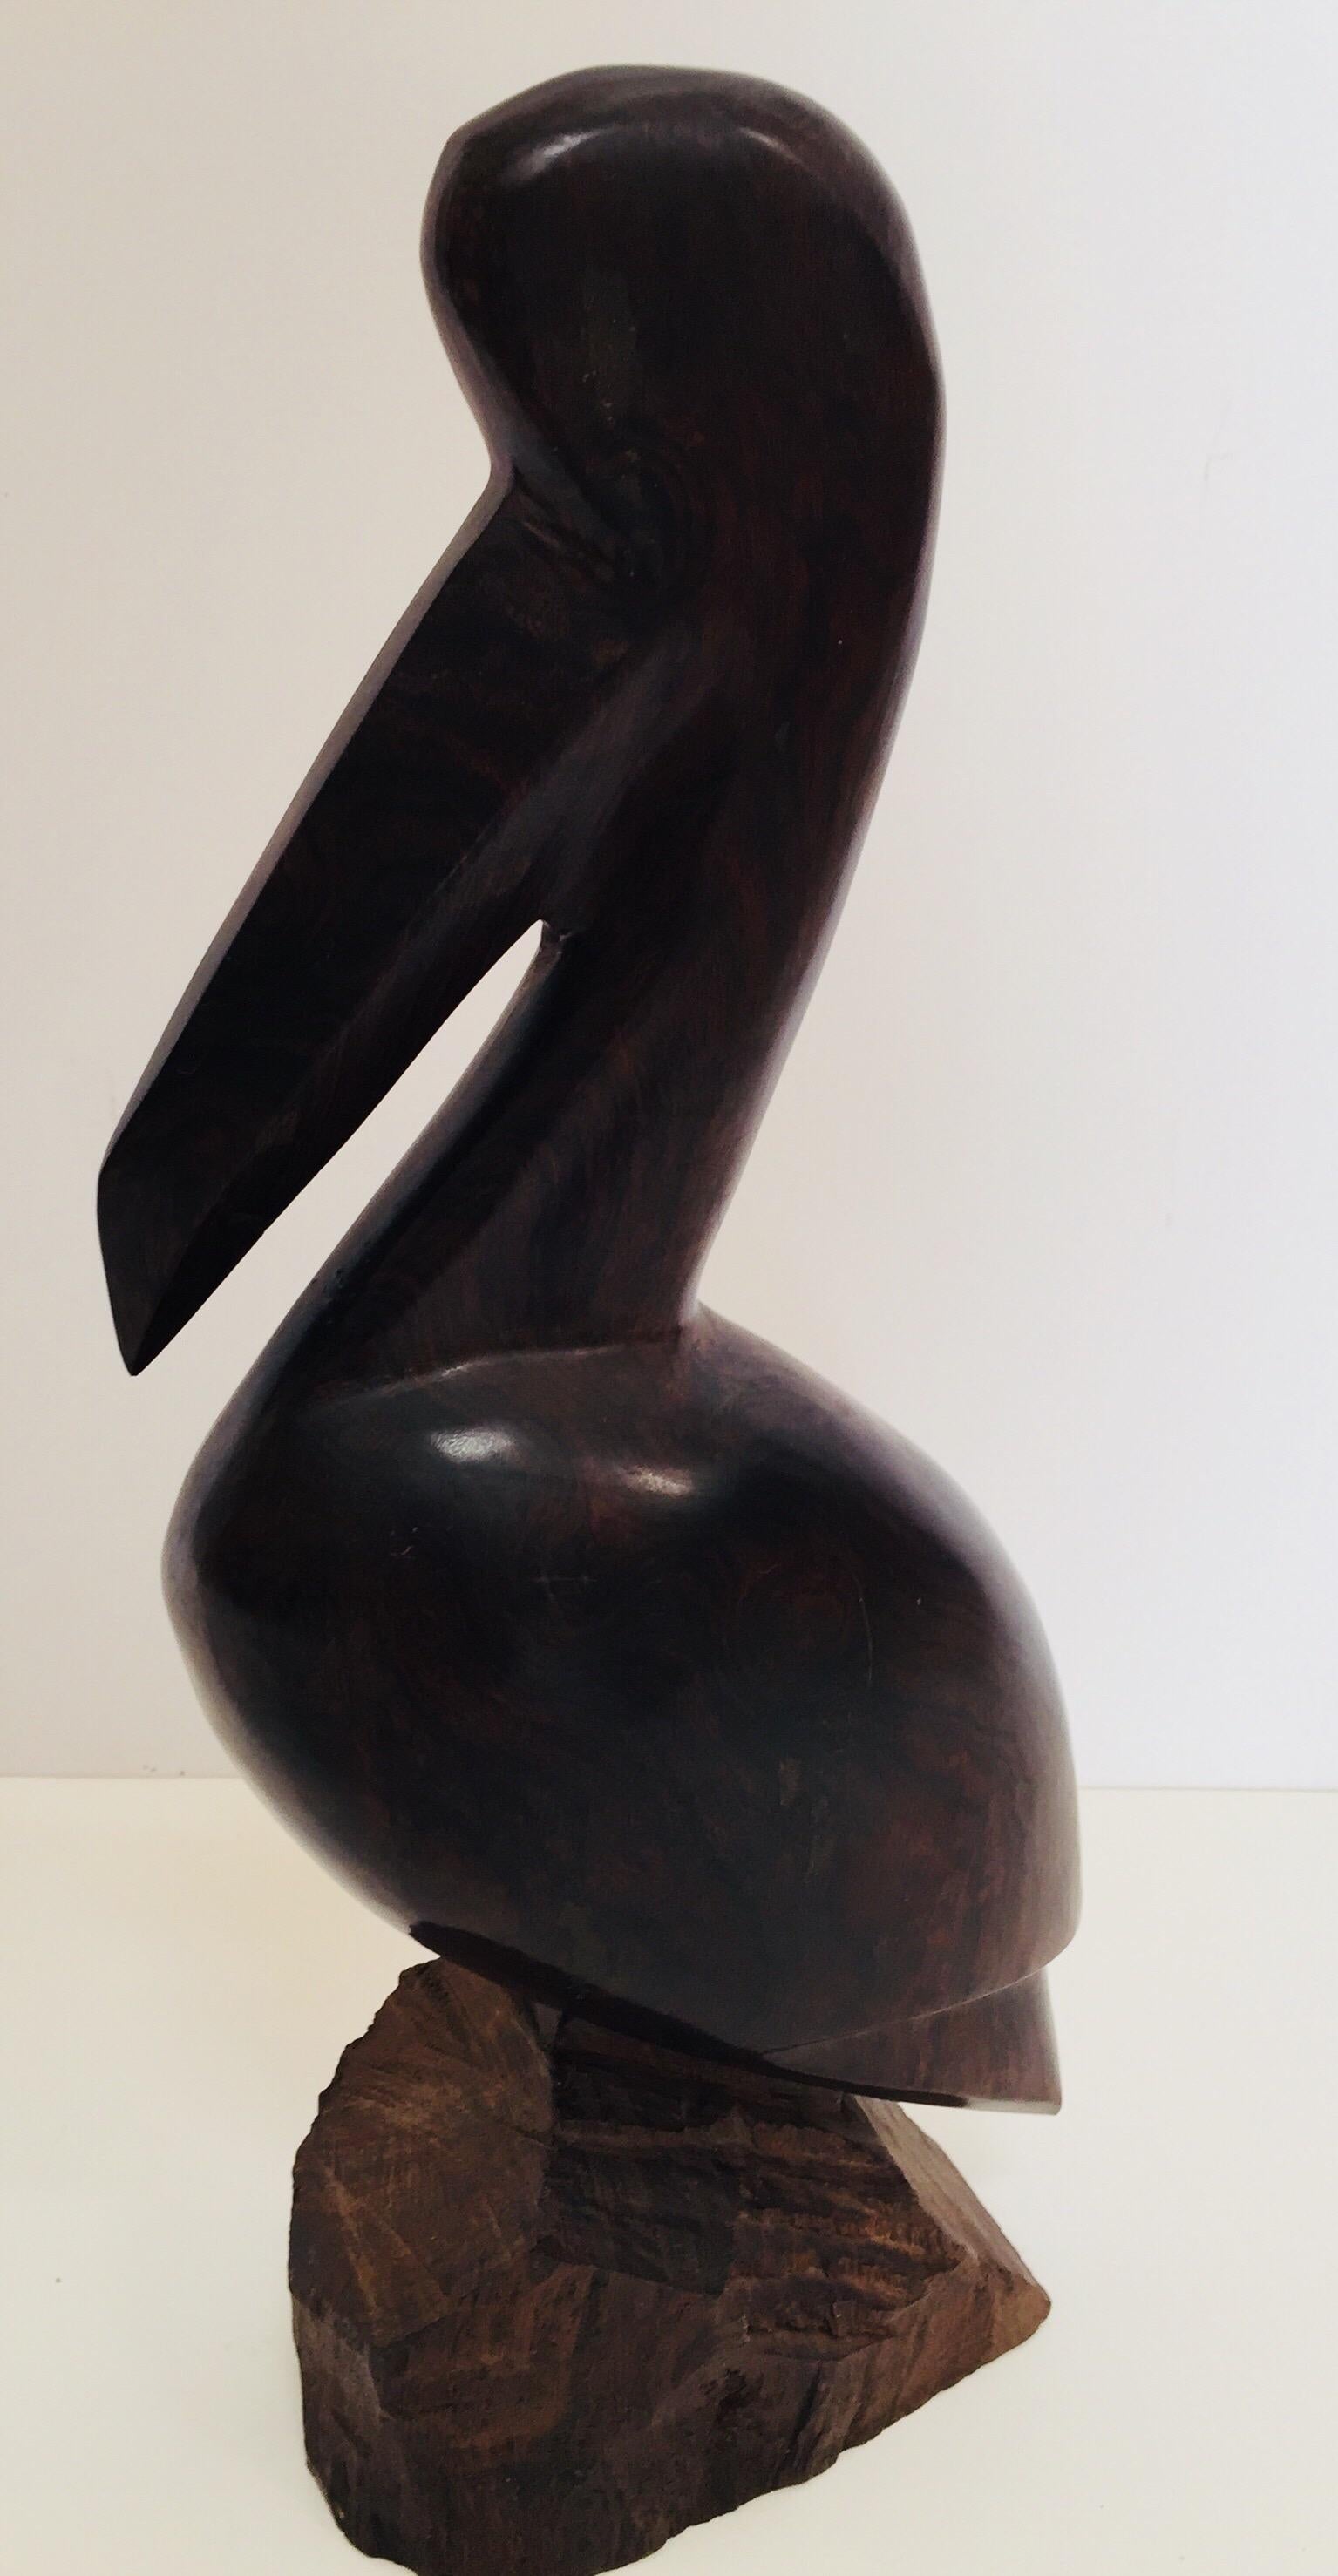 Large vintage hand carved Ironwood Mexican seri sculptures of a pelican and a whale.
Very nice polished heavy dark wood, no dents with a smooth finish over all excellent condition with
beautiful visible wood grains. 
circa 1970.
Pelican: 13.5